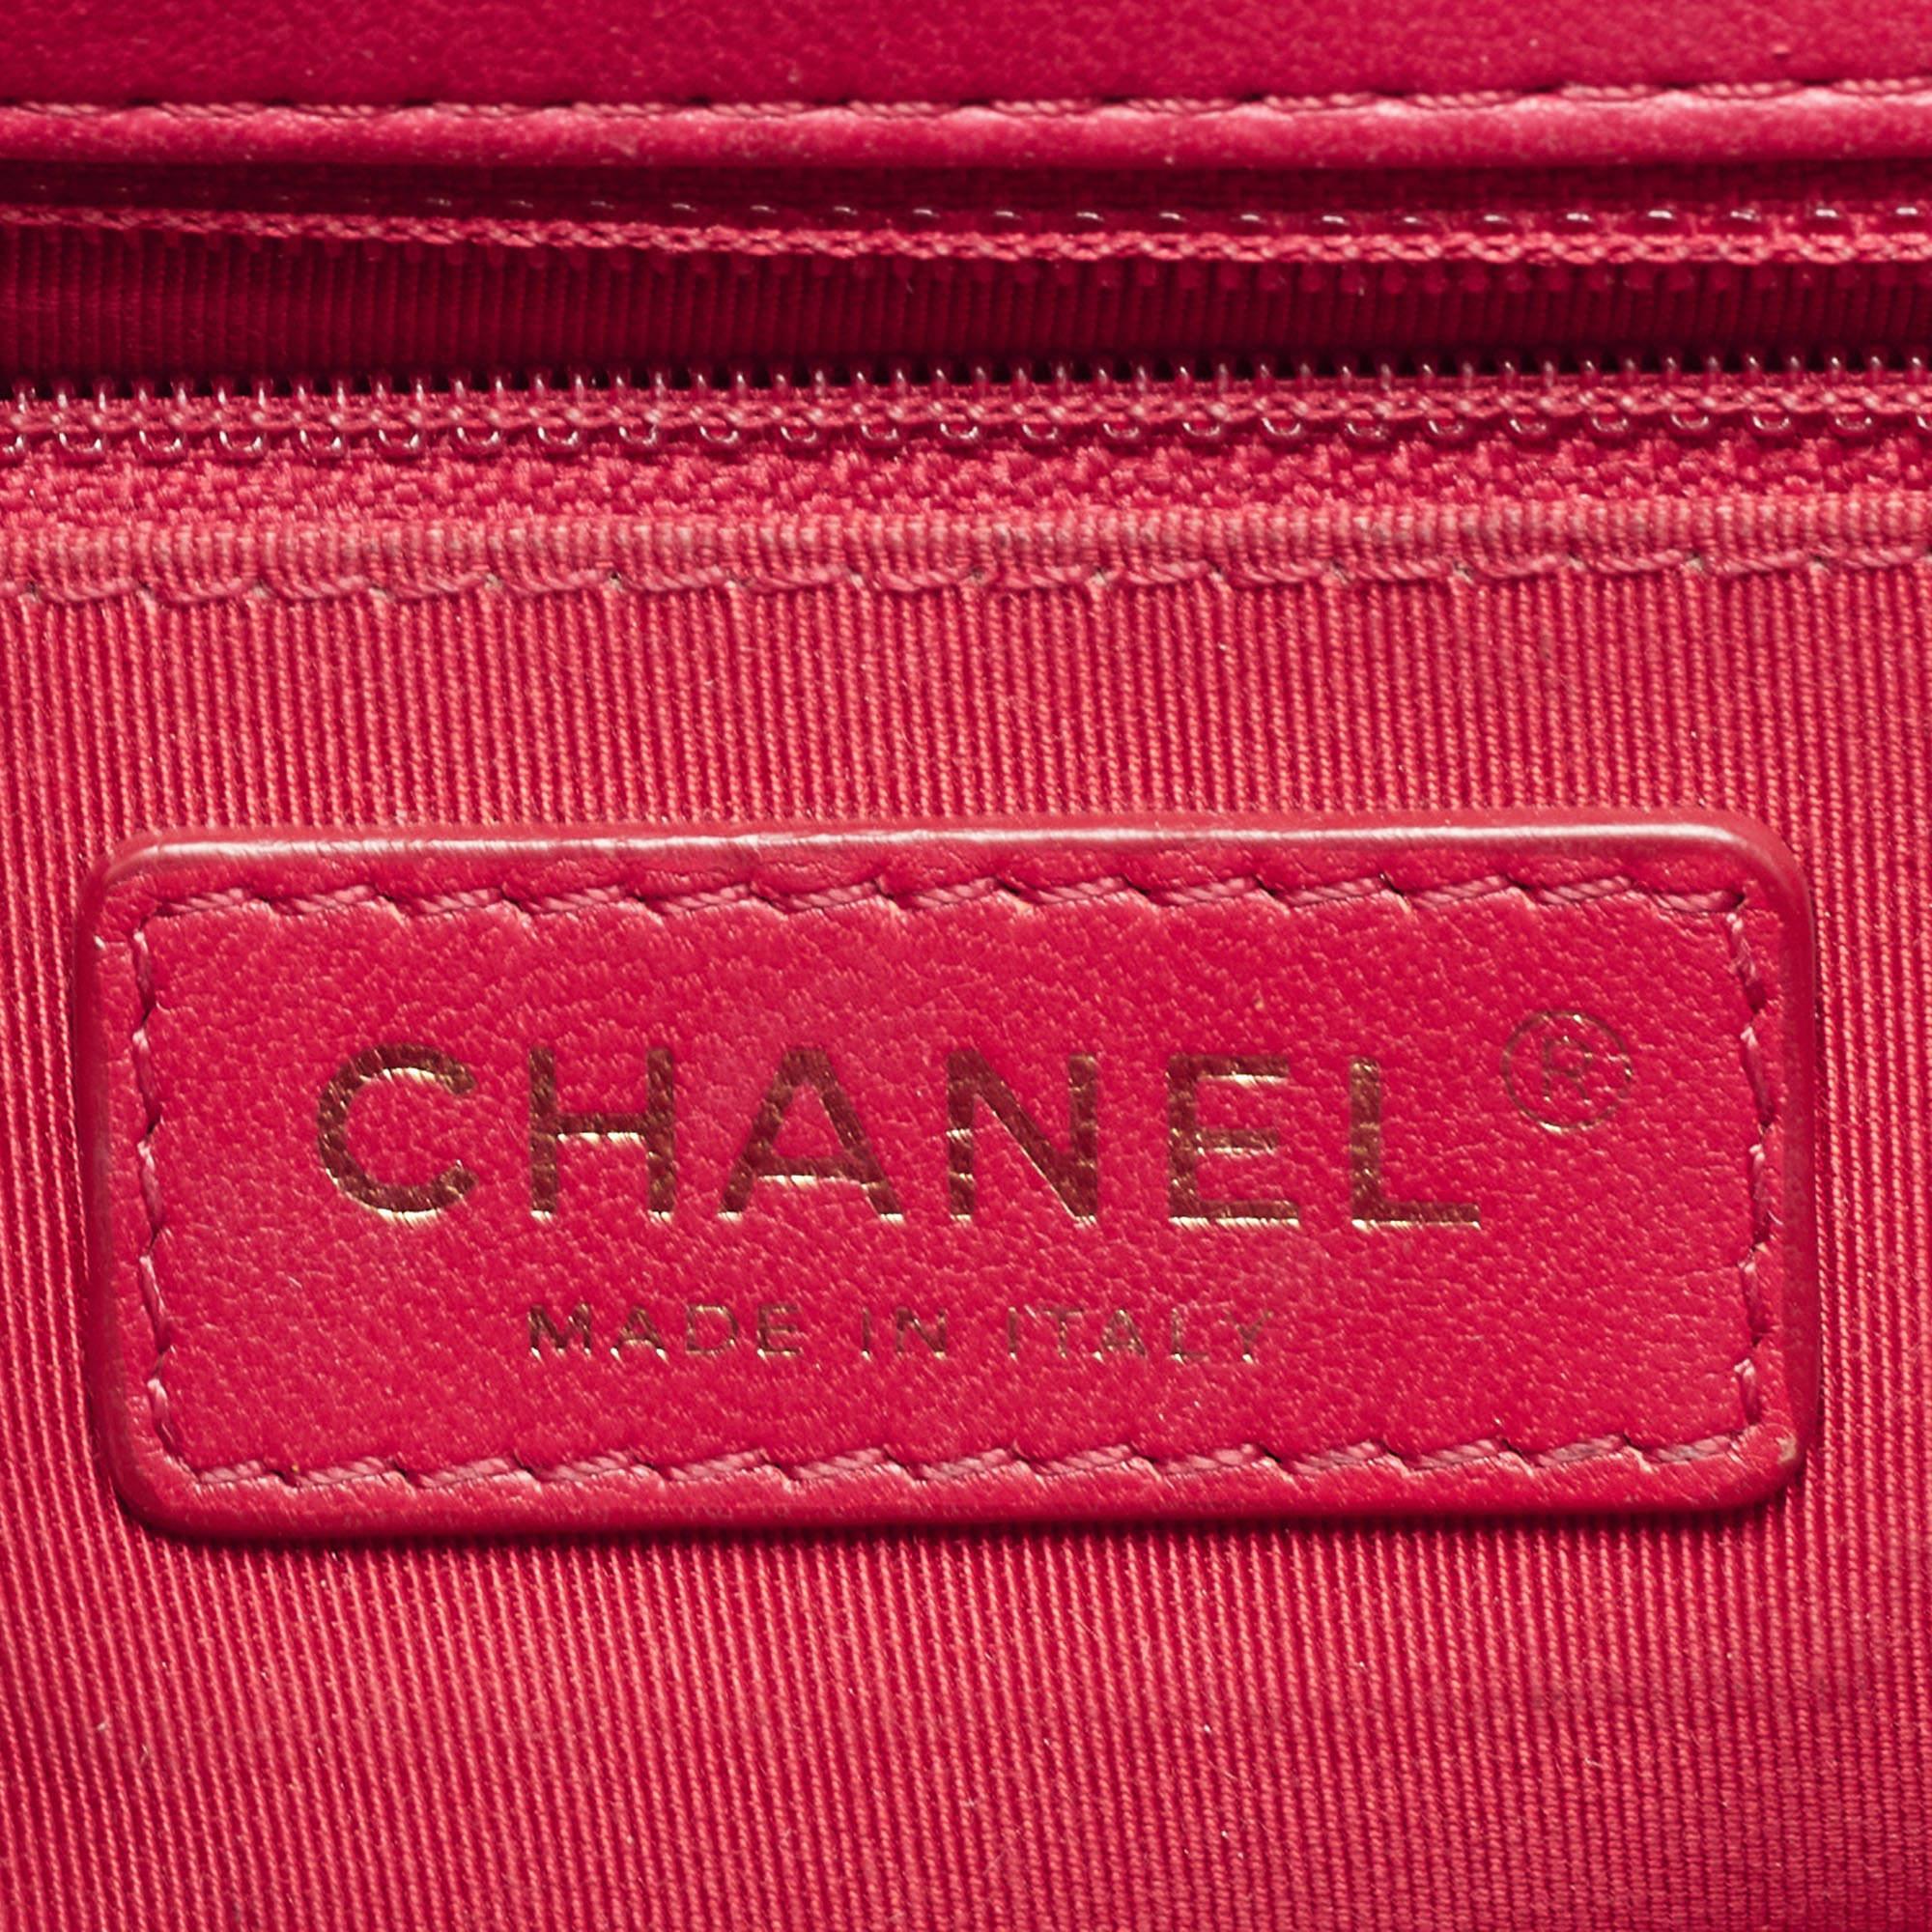 Chanel Red Quilted Leather Medium Mademoiselle Chic Flap Bag 6